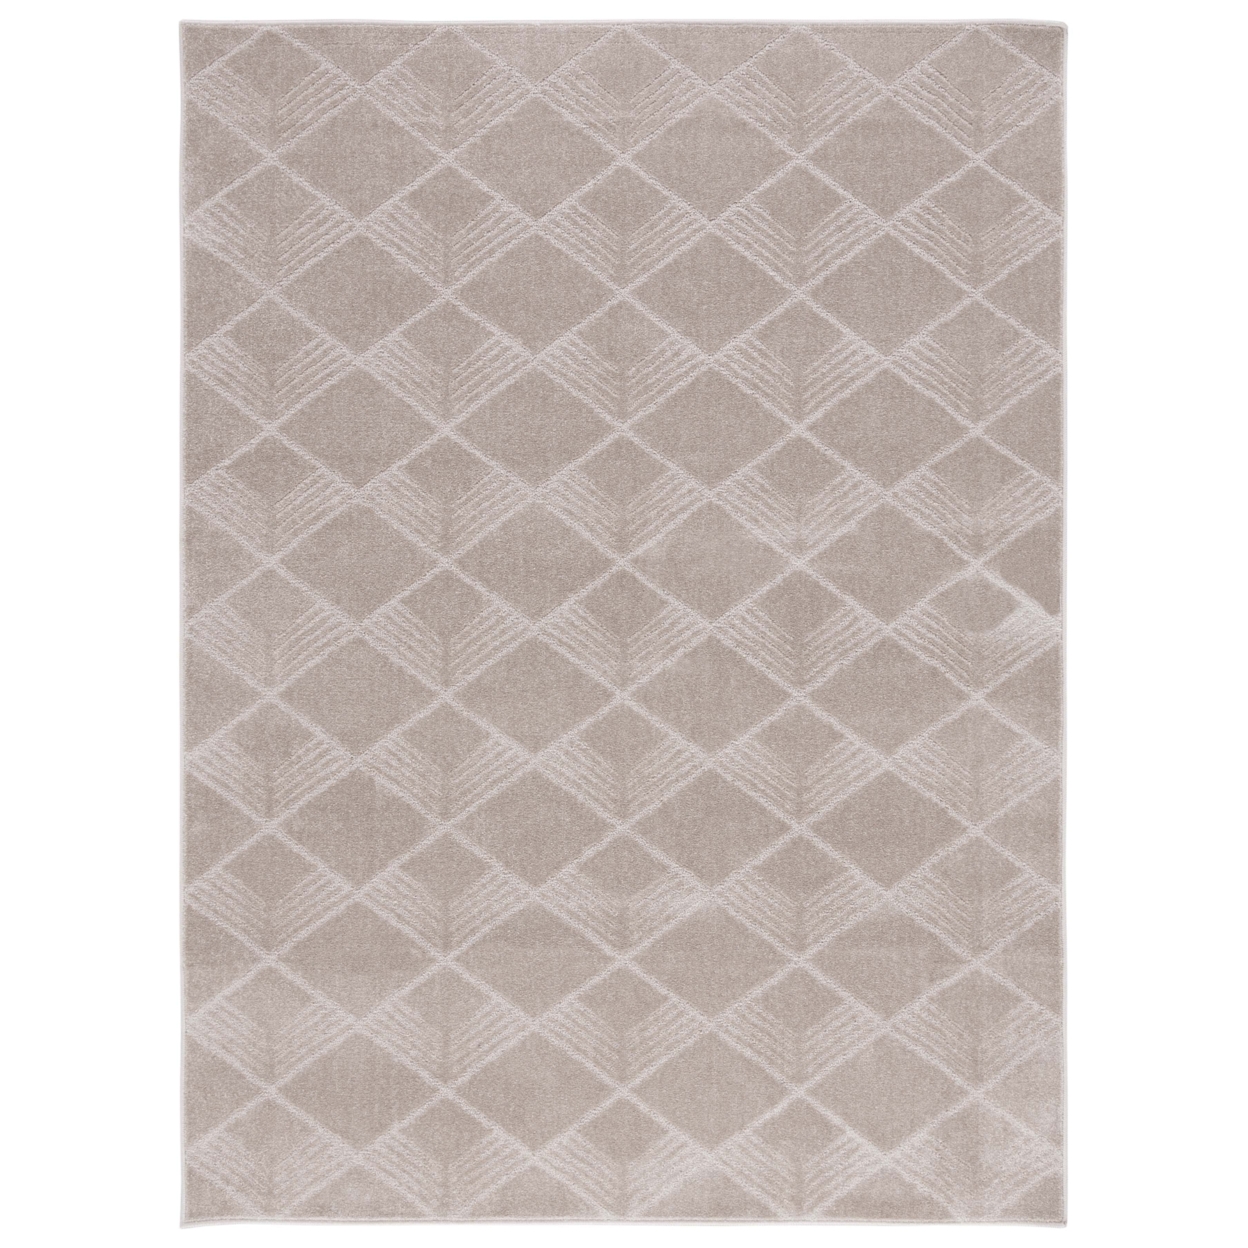 Safavieh PNS414B Pattern And Solid Beige - Silver / Ivory, 9' X 13' Rectangle